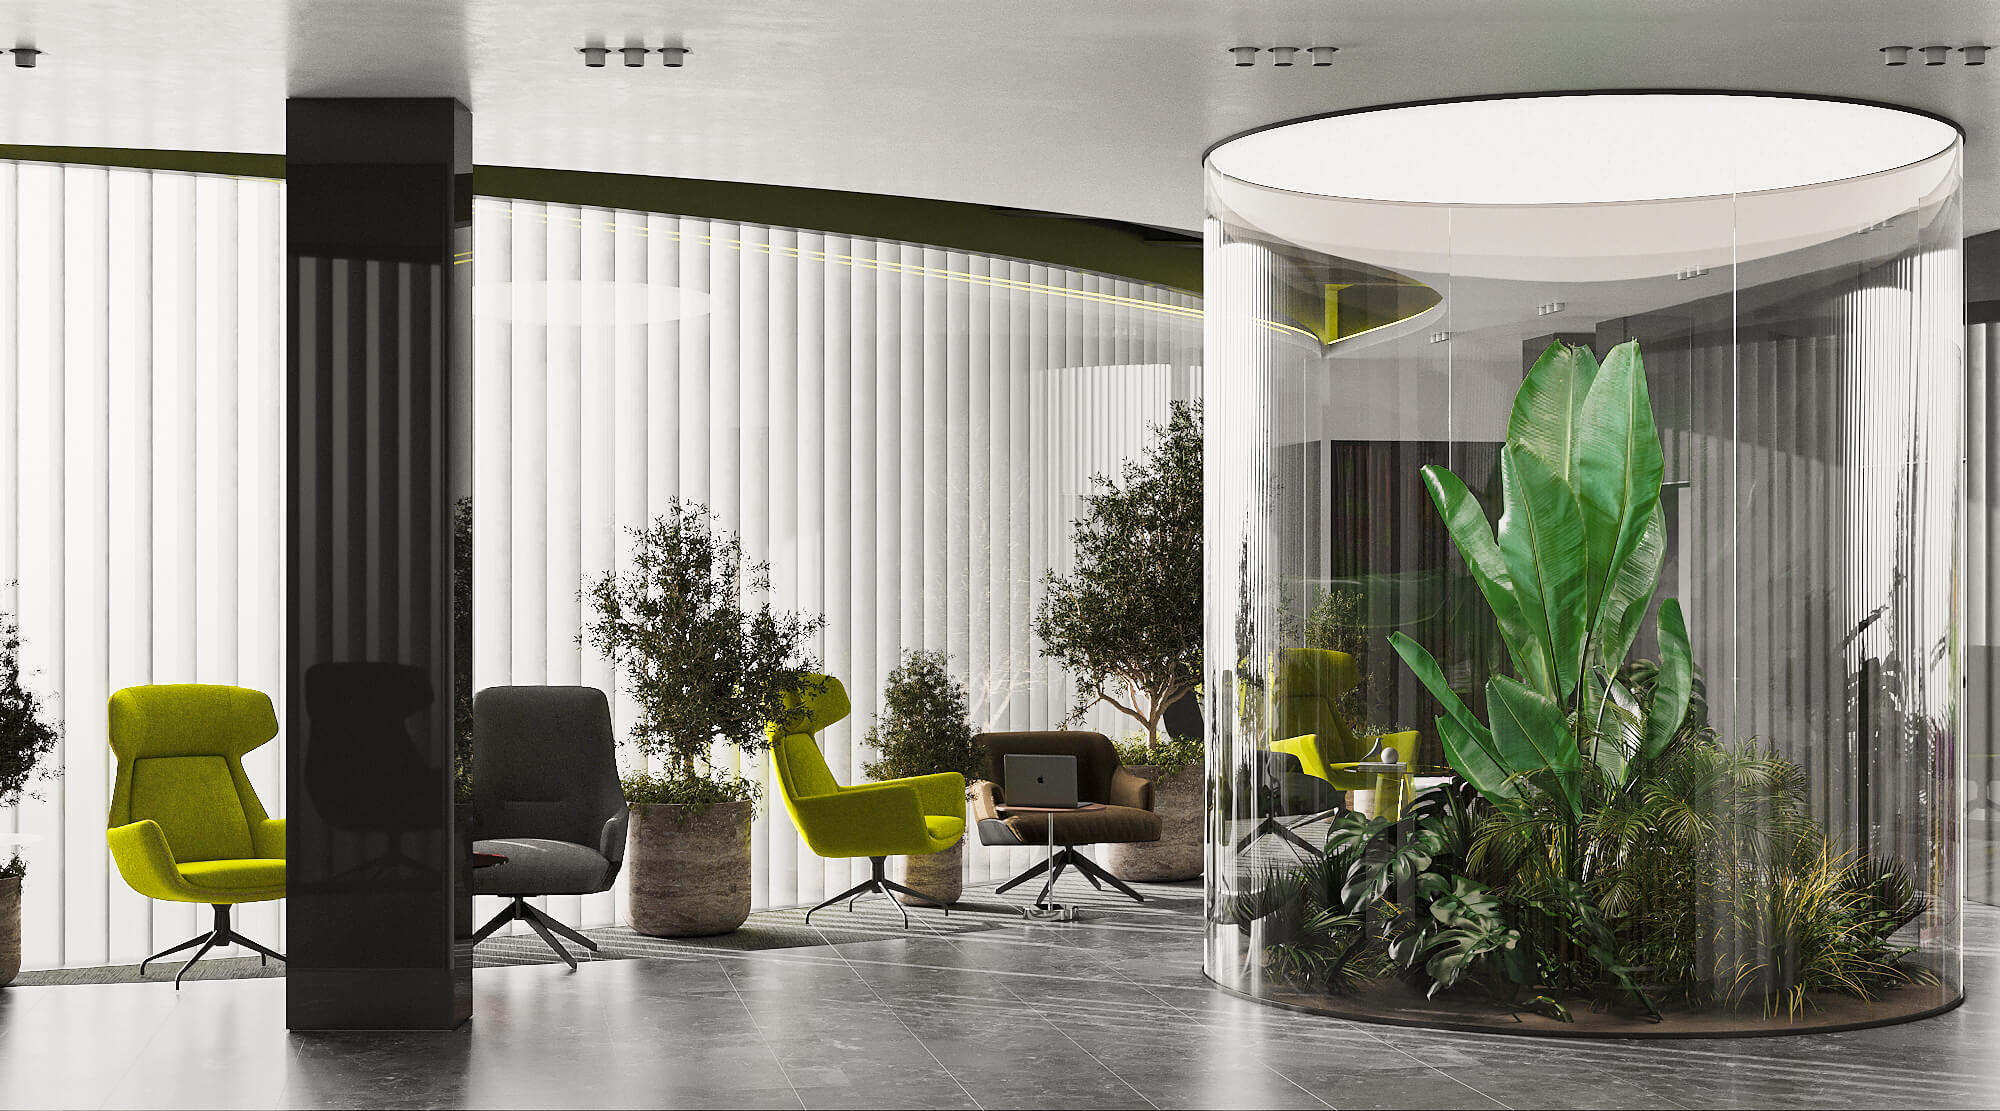 Design for Sustainable Development: How to Create an Eco-Friendly Office Space? 1